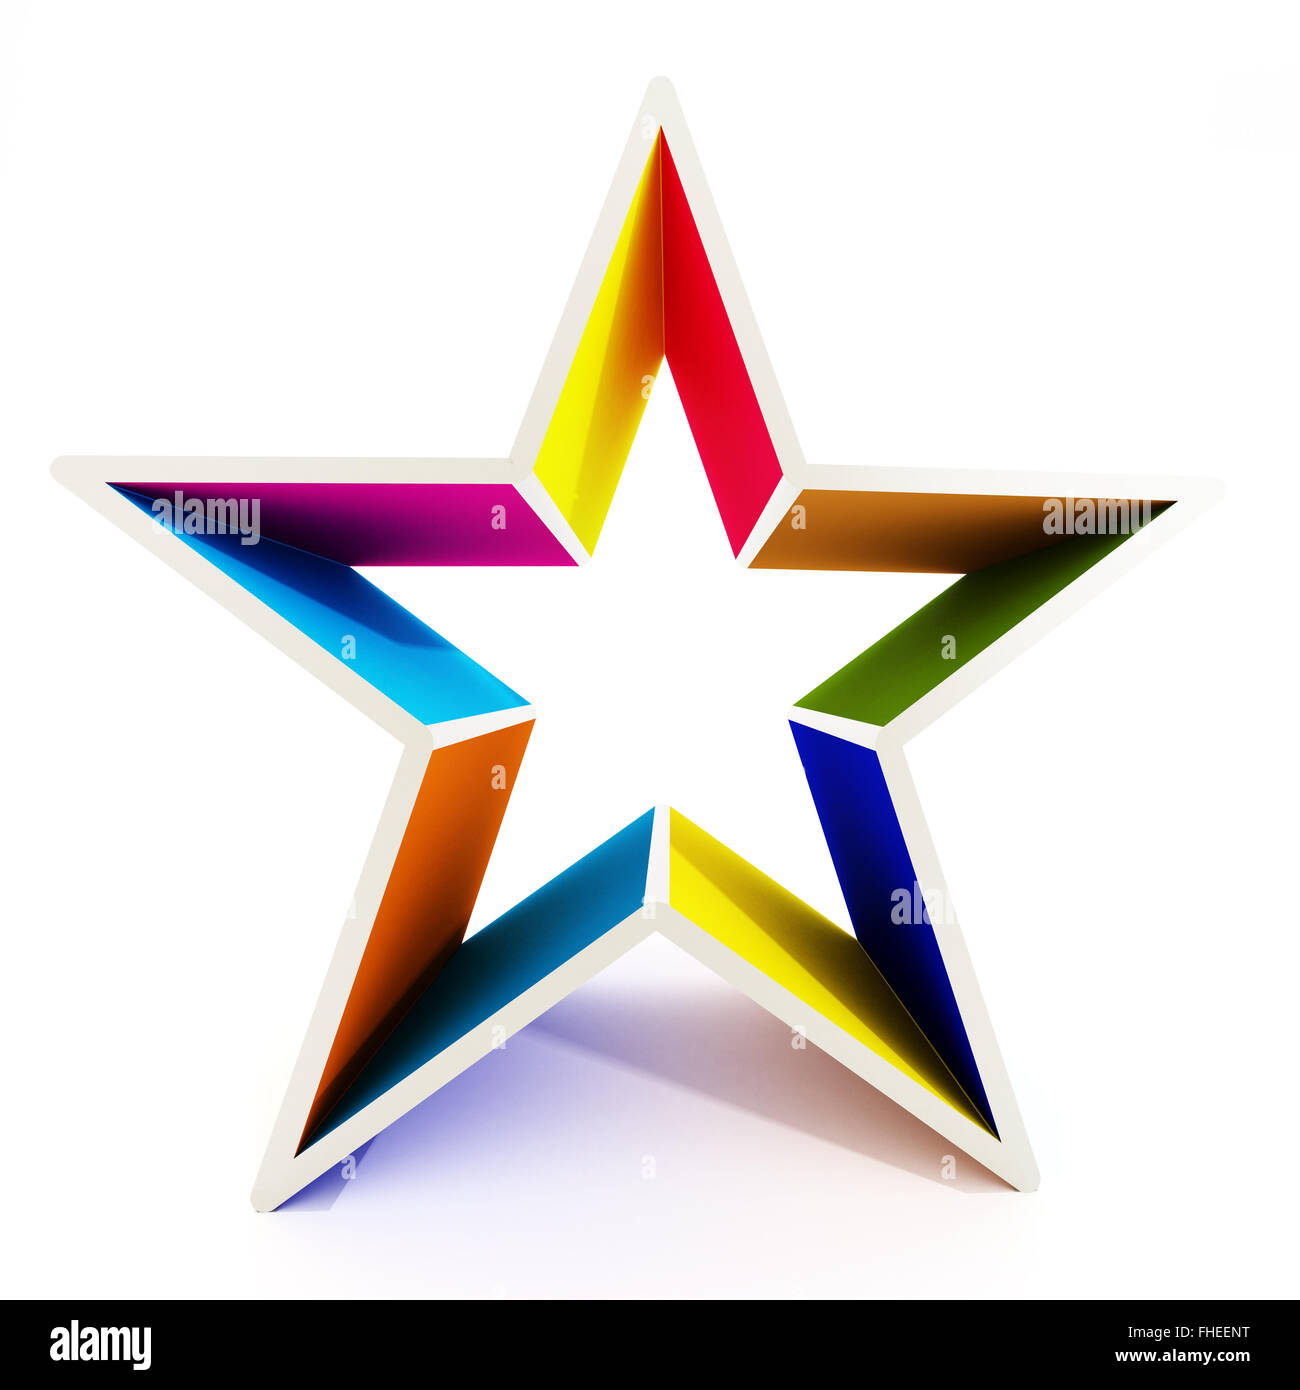 stacking of colorful origami paper stars decoration Stock Photo